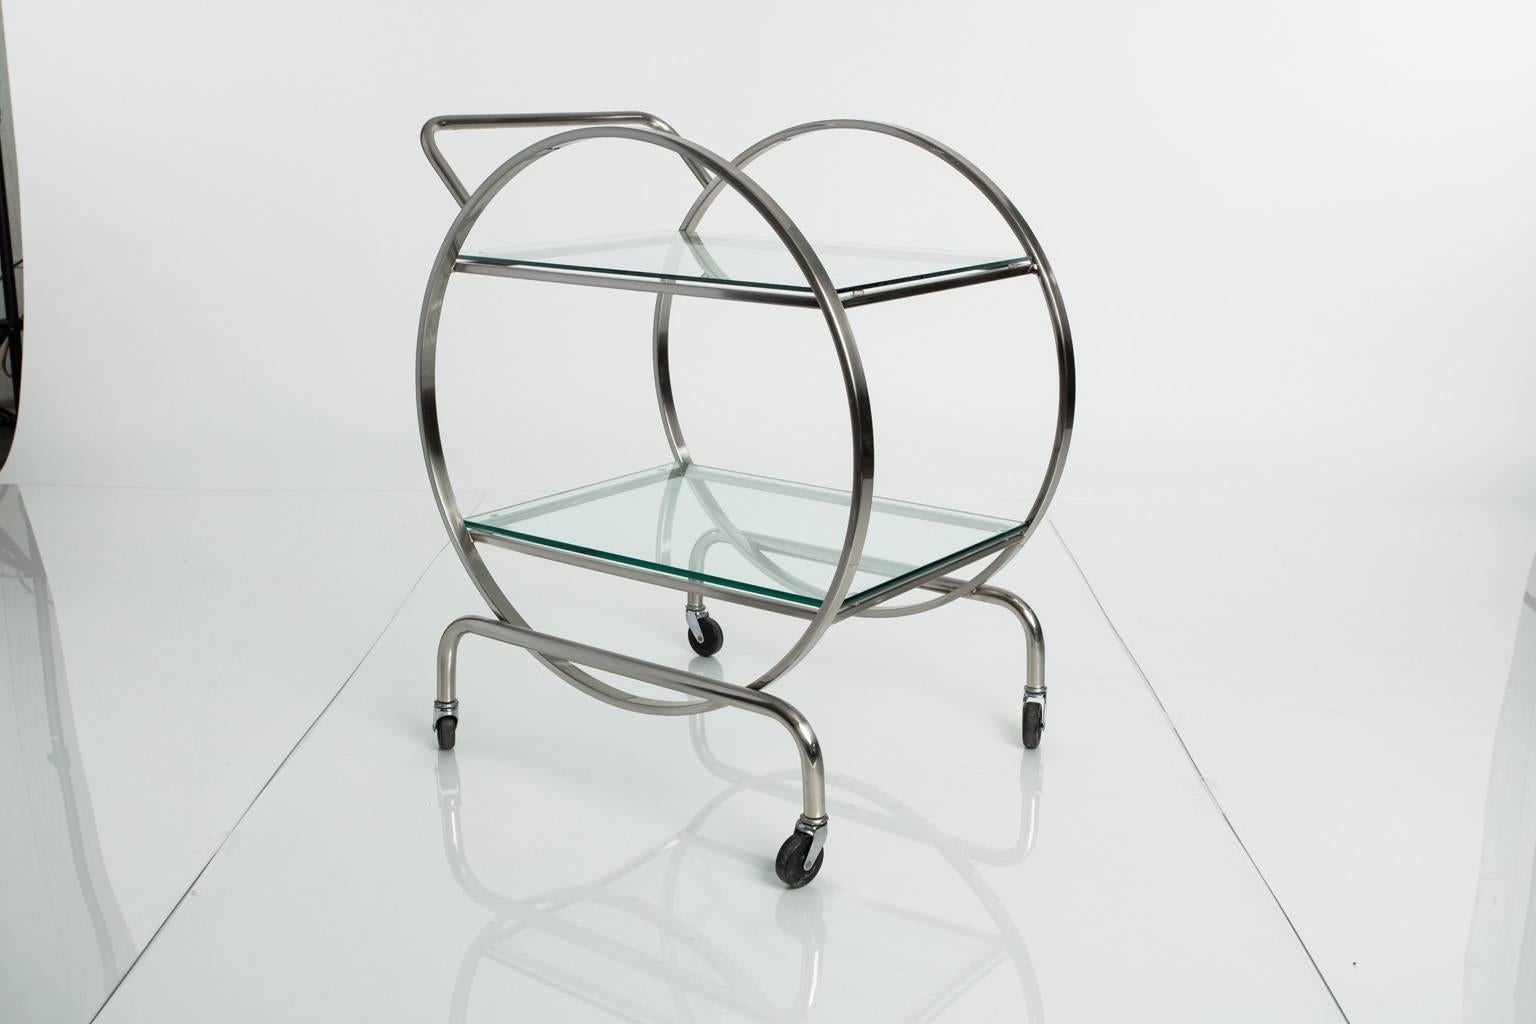 Steel and glass rolling tea cart with two glass shelves.